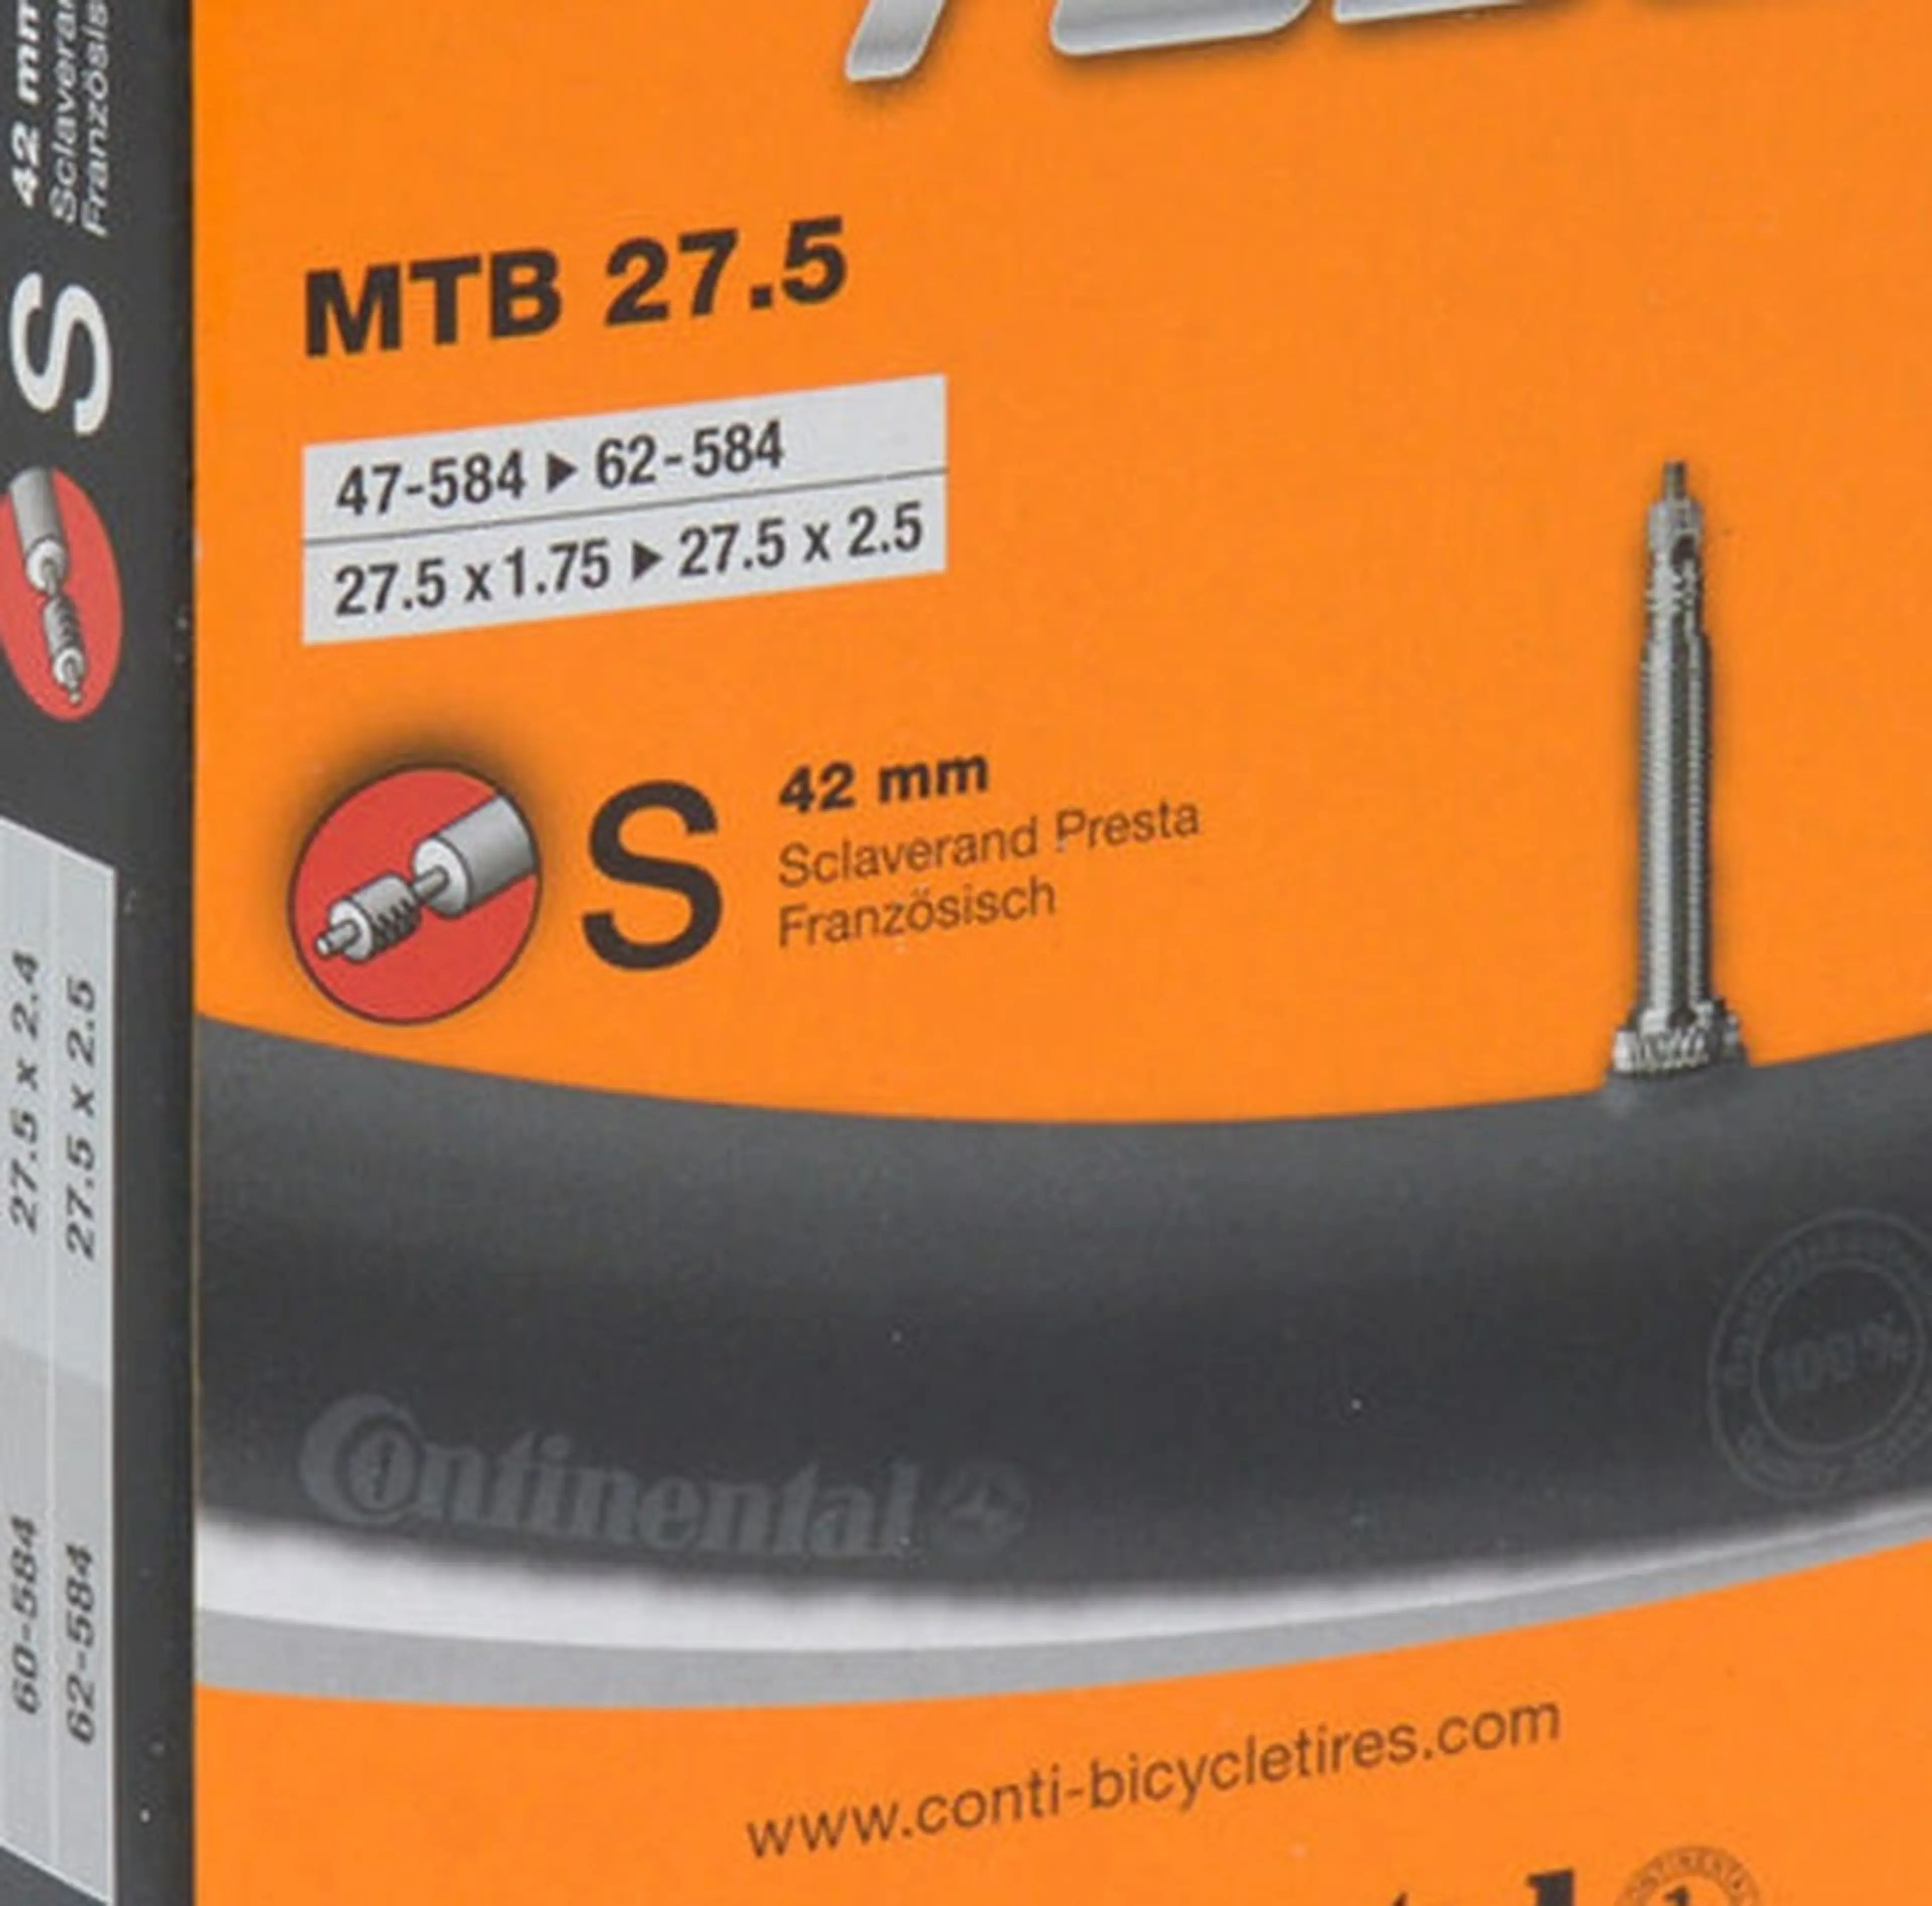 1. Continental Wide Tube 27.5x1.75-2.50 FV.